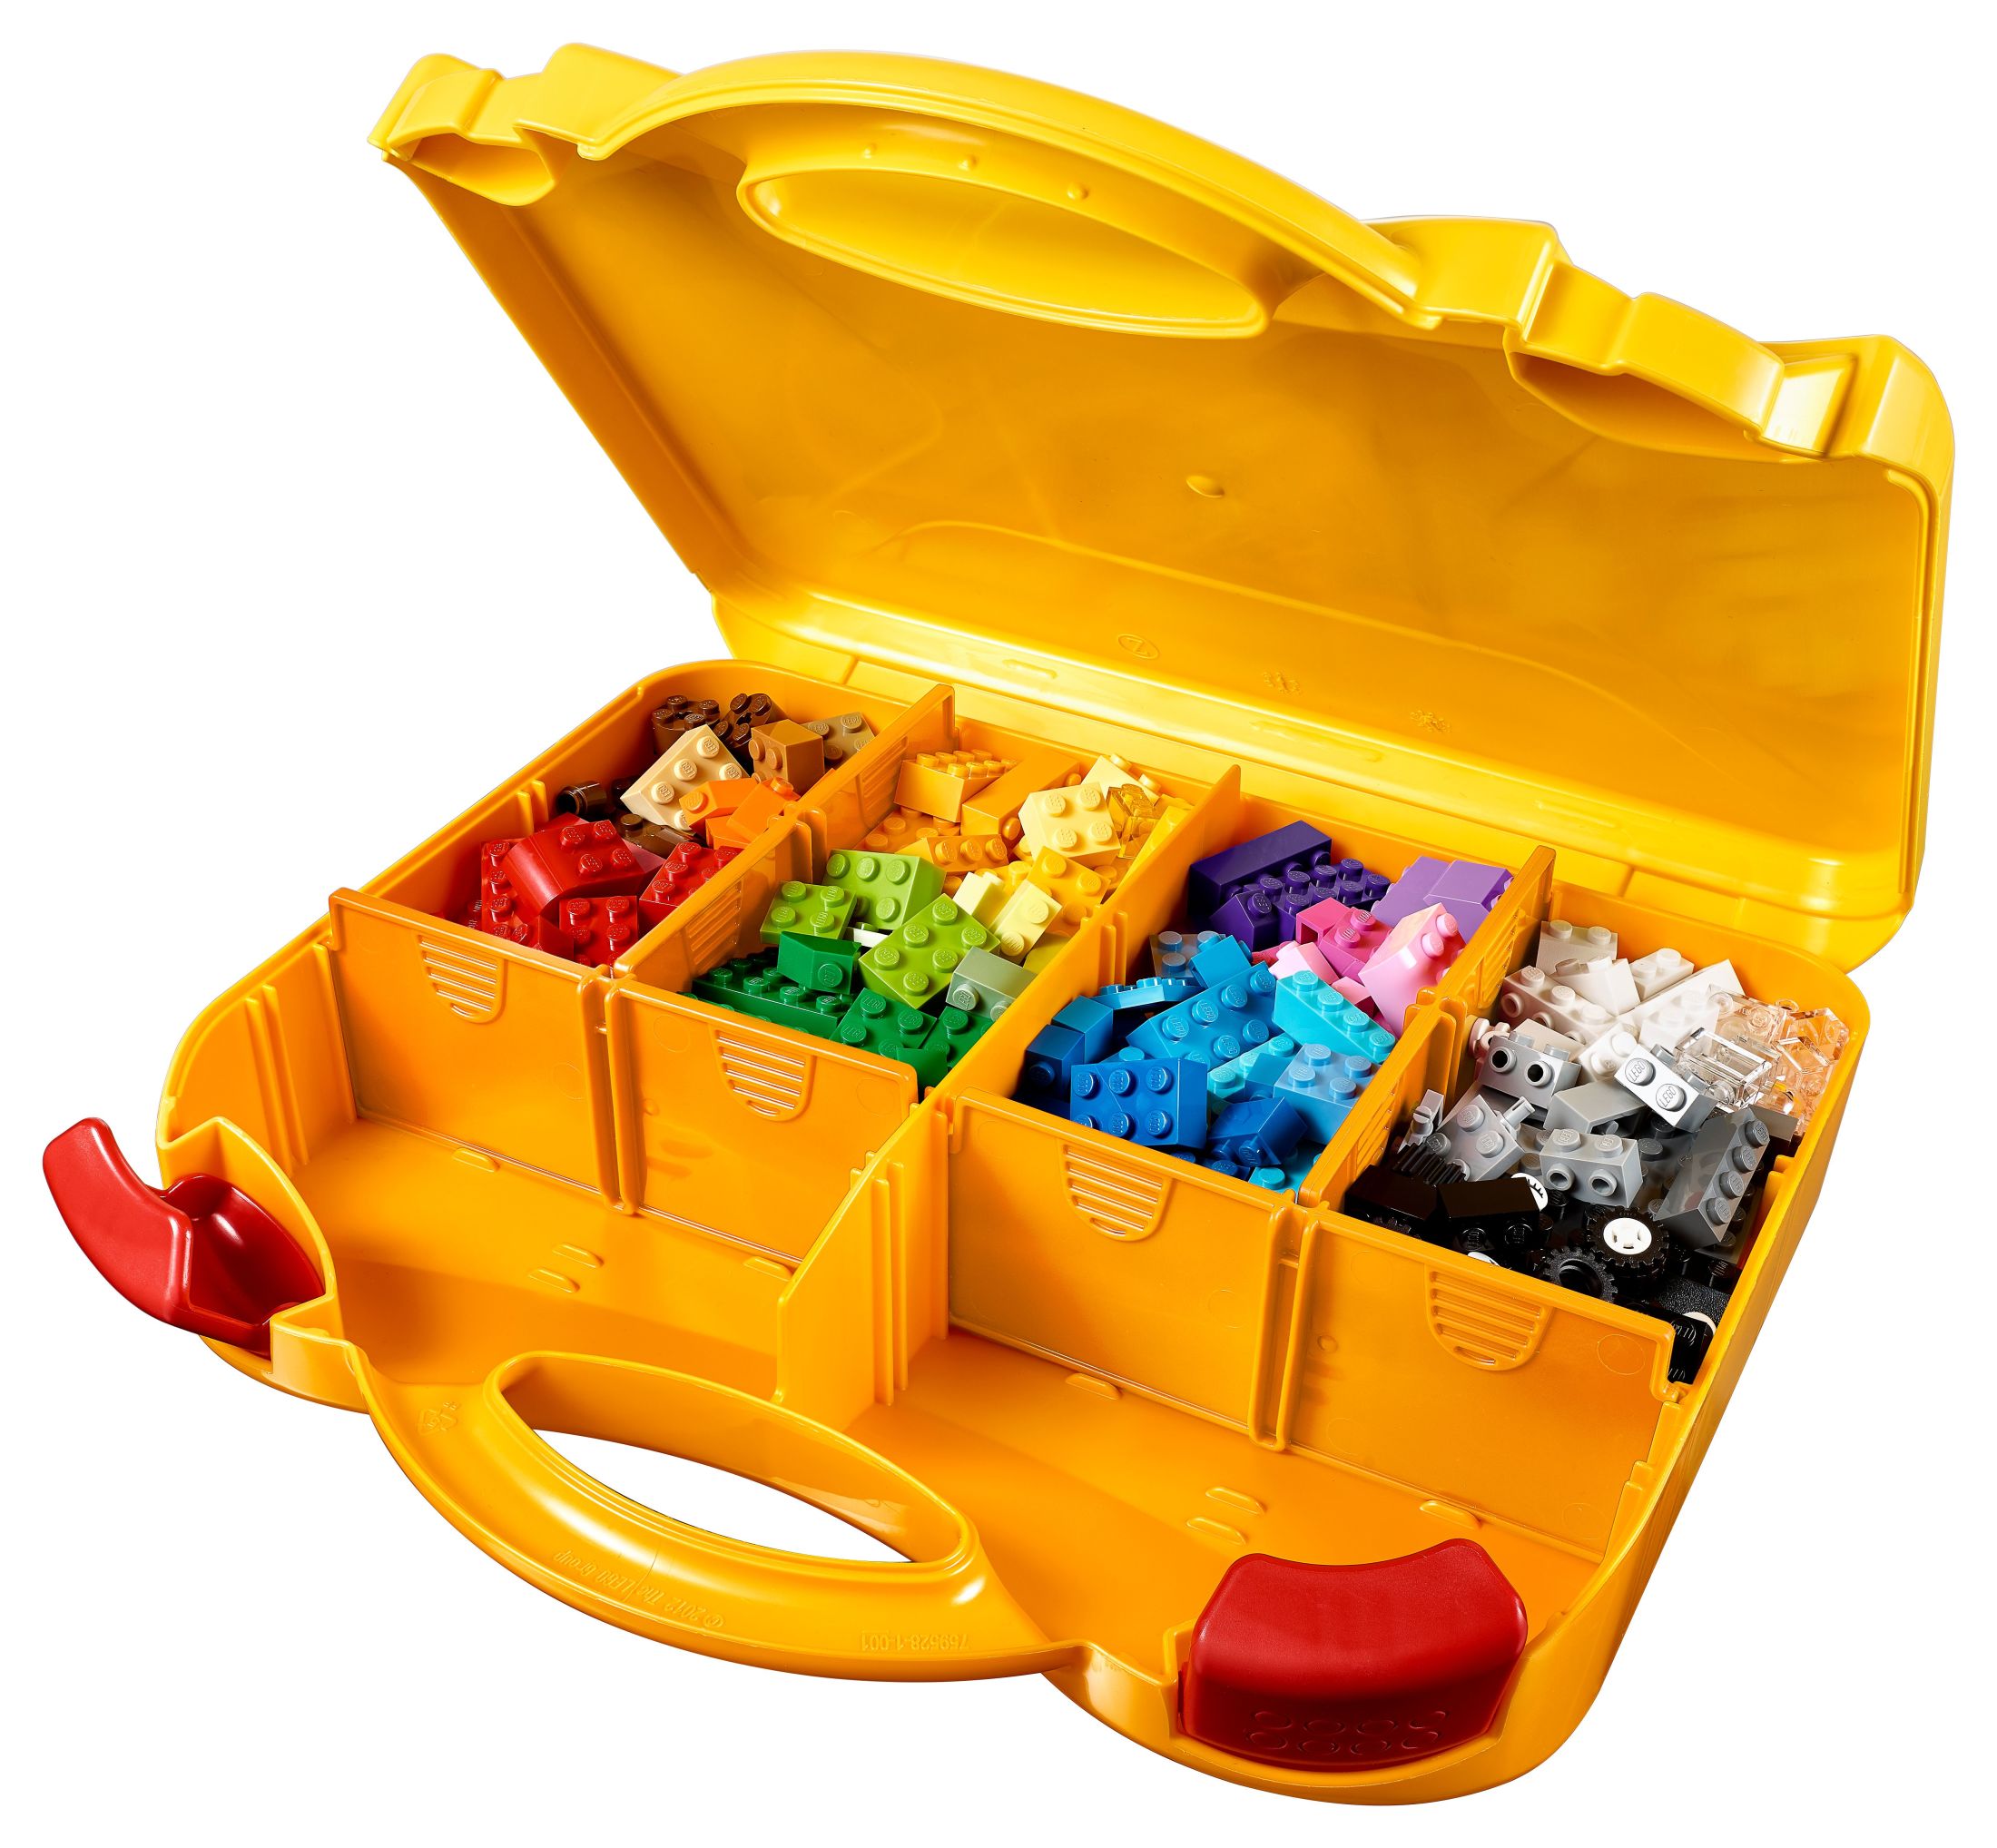 LEGO Classic Creative Suitcase 10713 - Includes Sorting Storage Organizer Case with Fun Colorful Building Bricks, Preschool Learning Toy for Kids to Play and Be Inspired by LEGO Masters - image 4 of 7